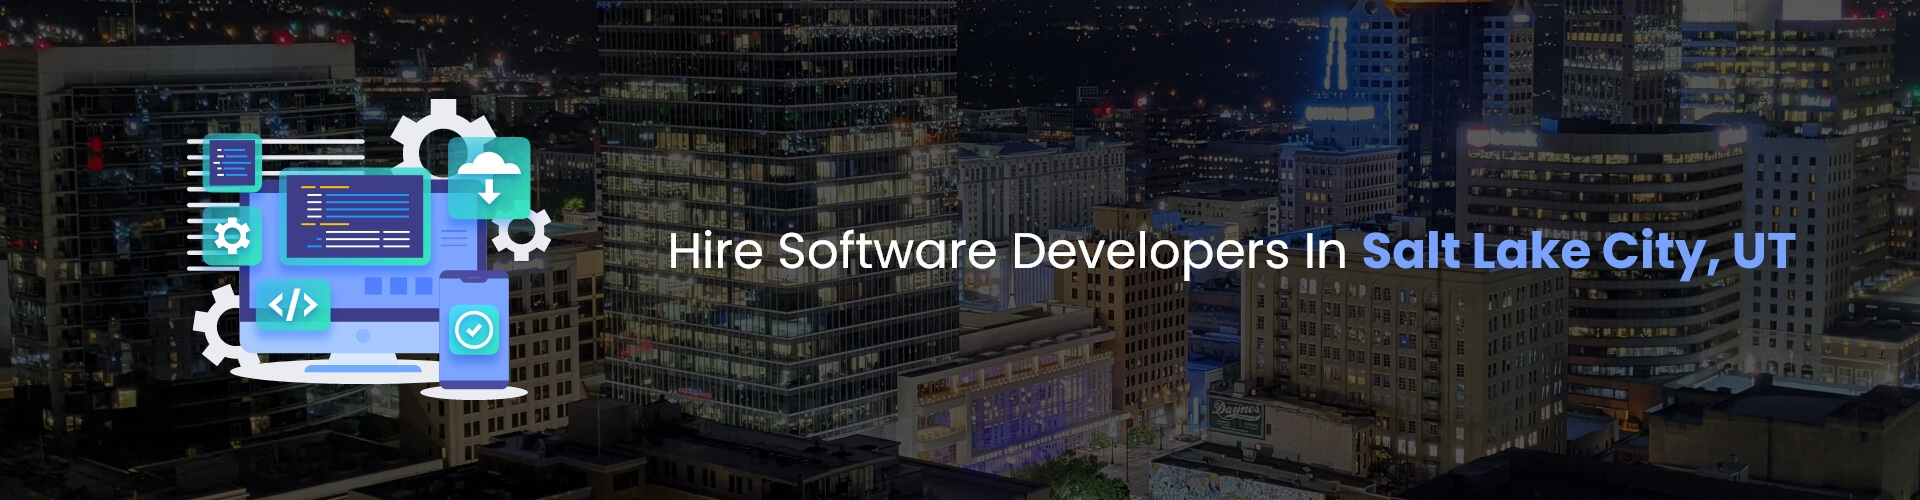 hire software developers in salt lake city